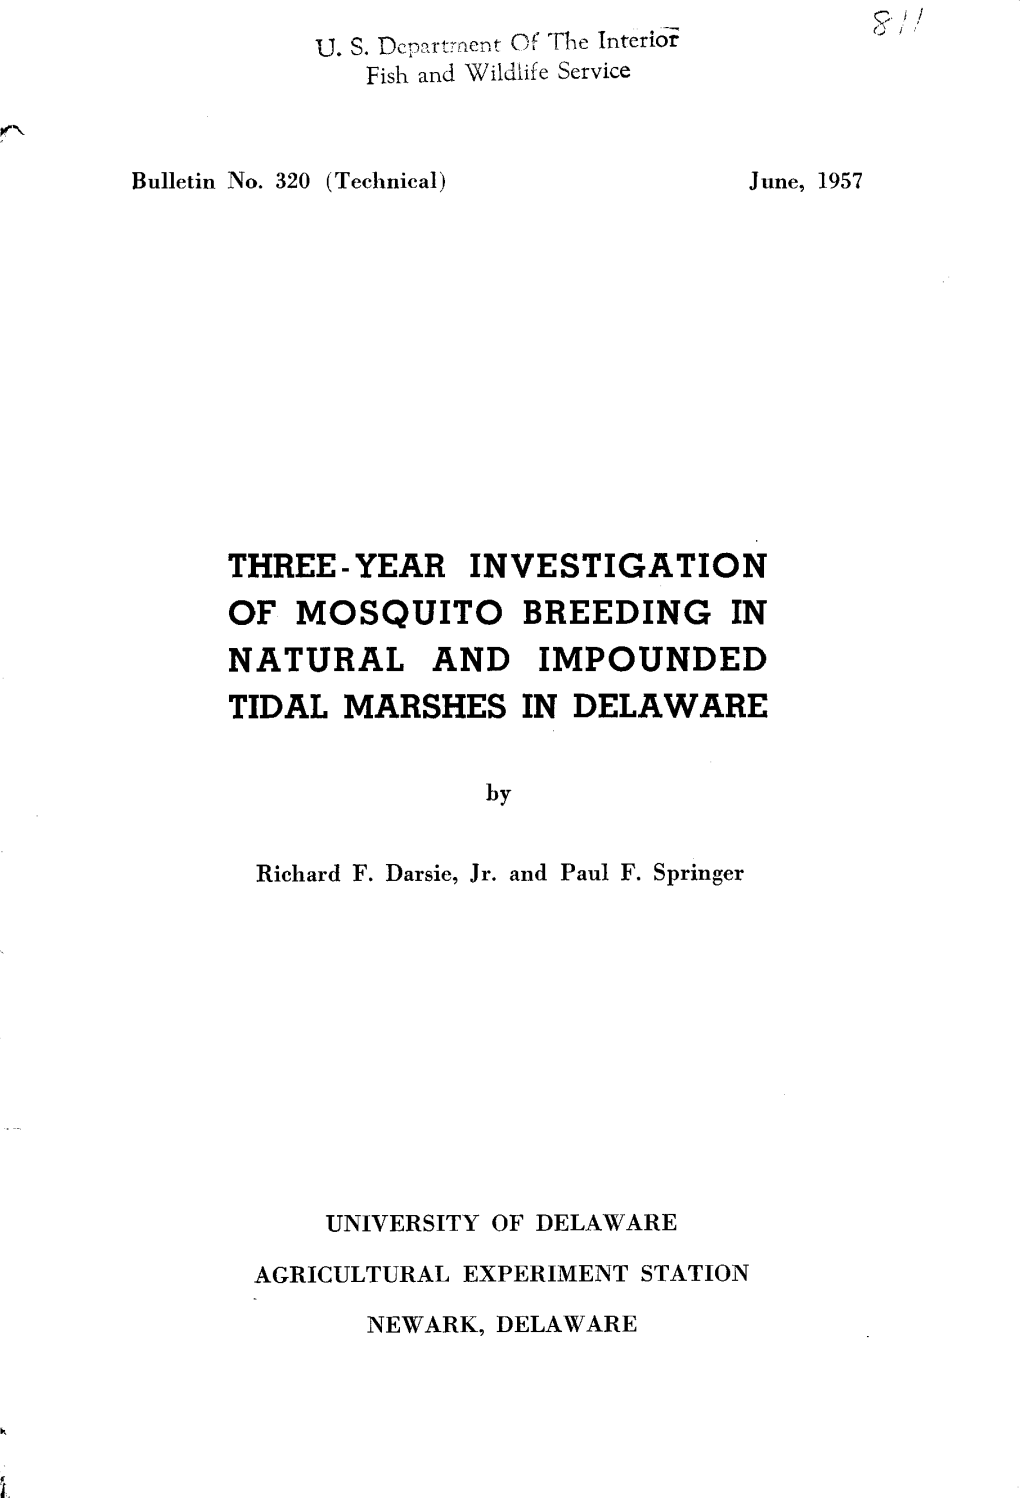 Three-Year Investigation of Mosquito Breeding in Natural and Impounded Tidal Marshes in Delaware